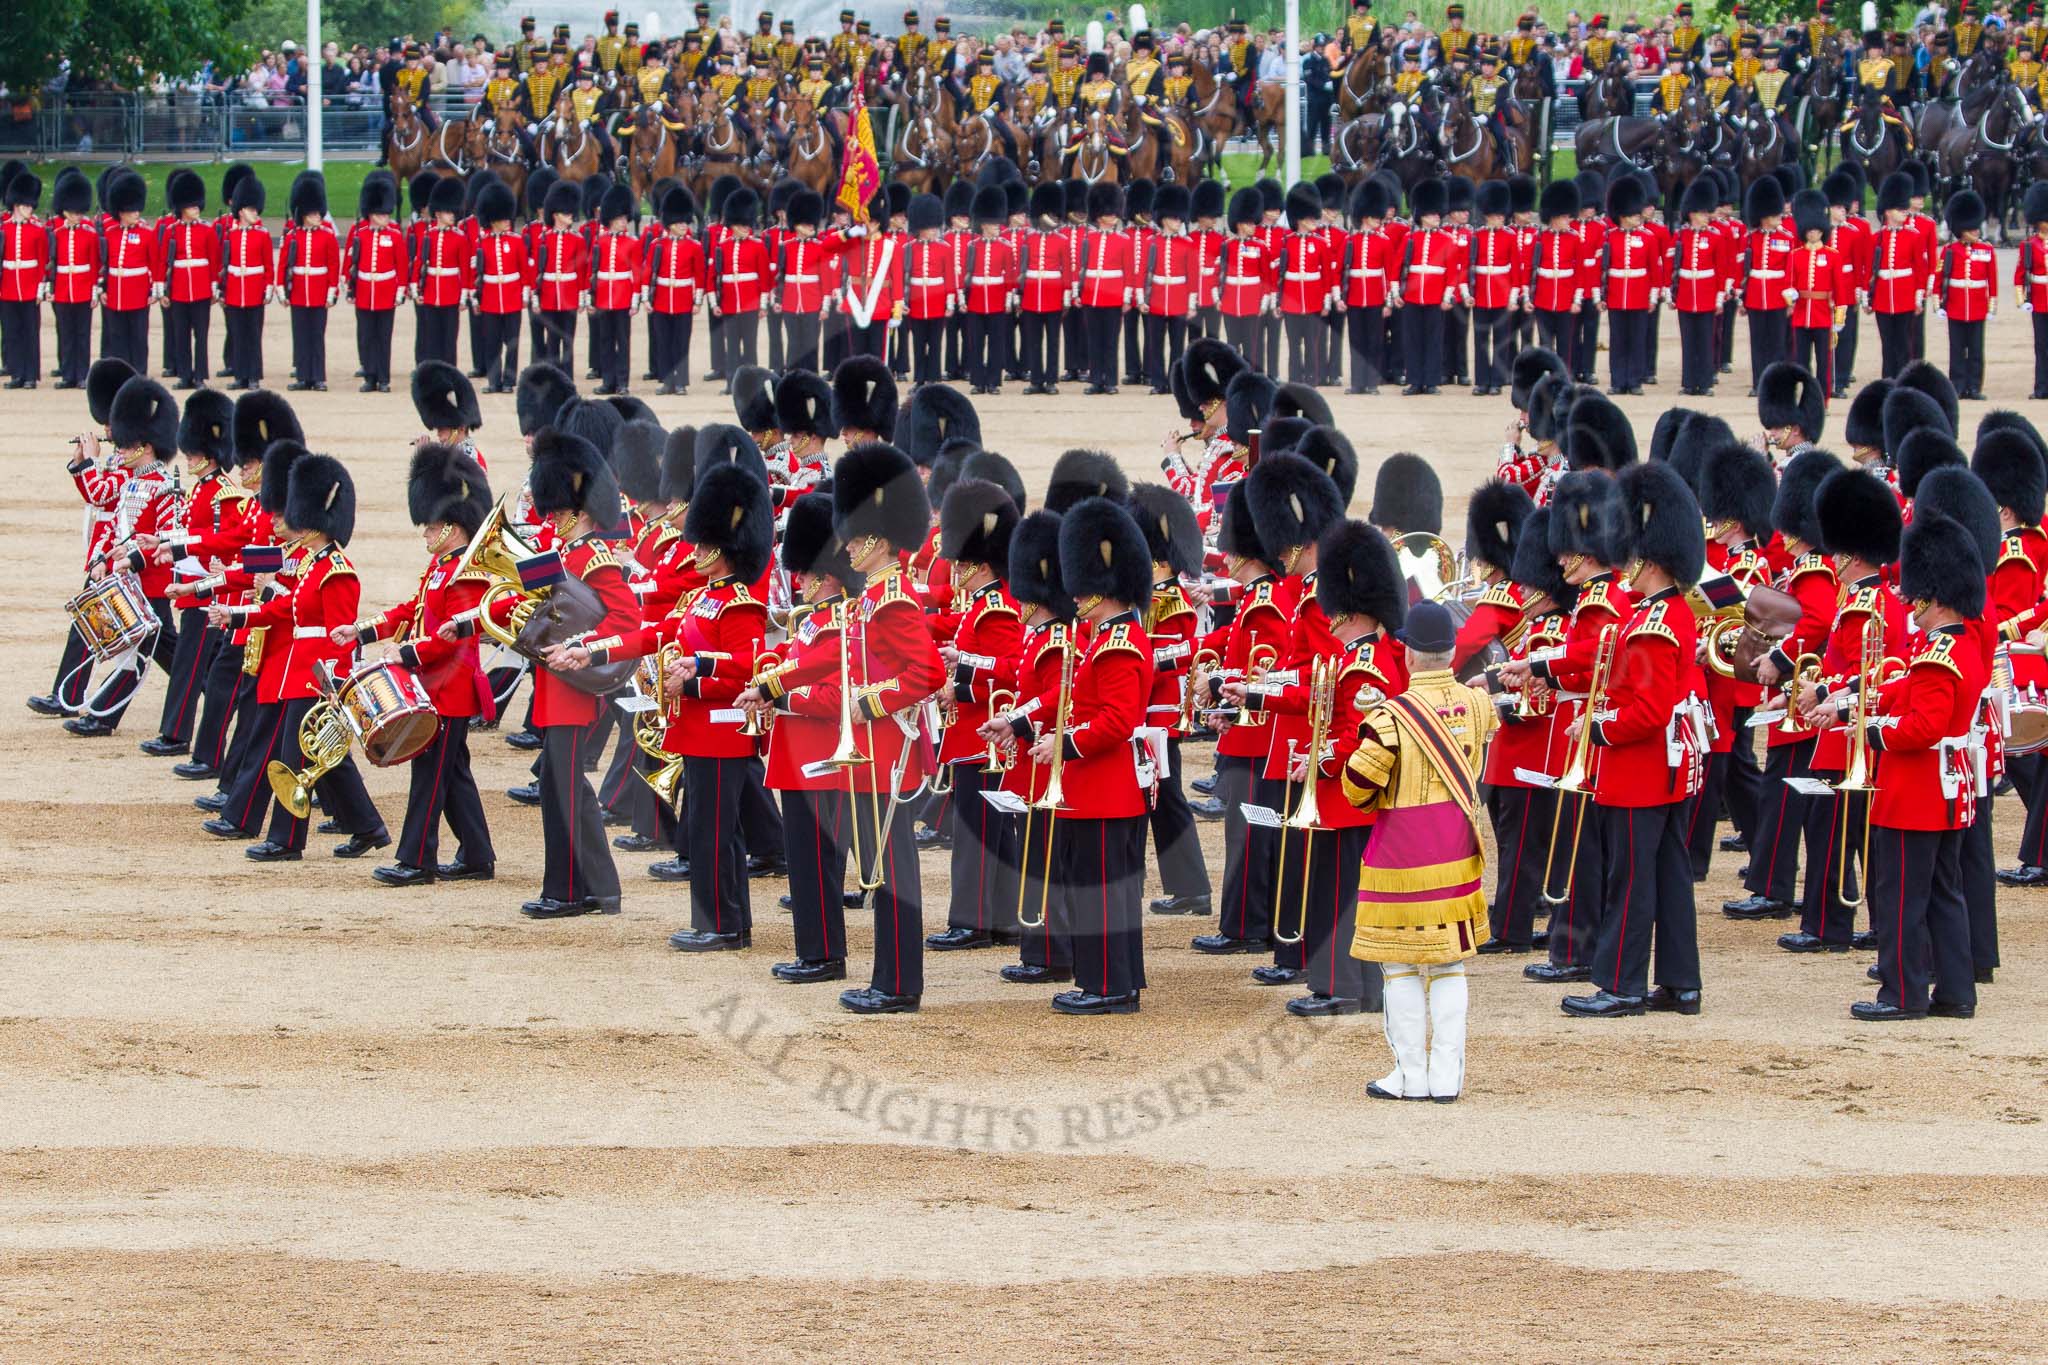 Trooping the Colour 2014.
Horse Guards Parade, Westminster,
London SW1A,

United Kingdom,
on 14 June 2014 at 11:53, image #713